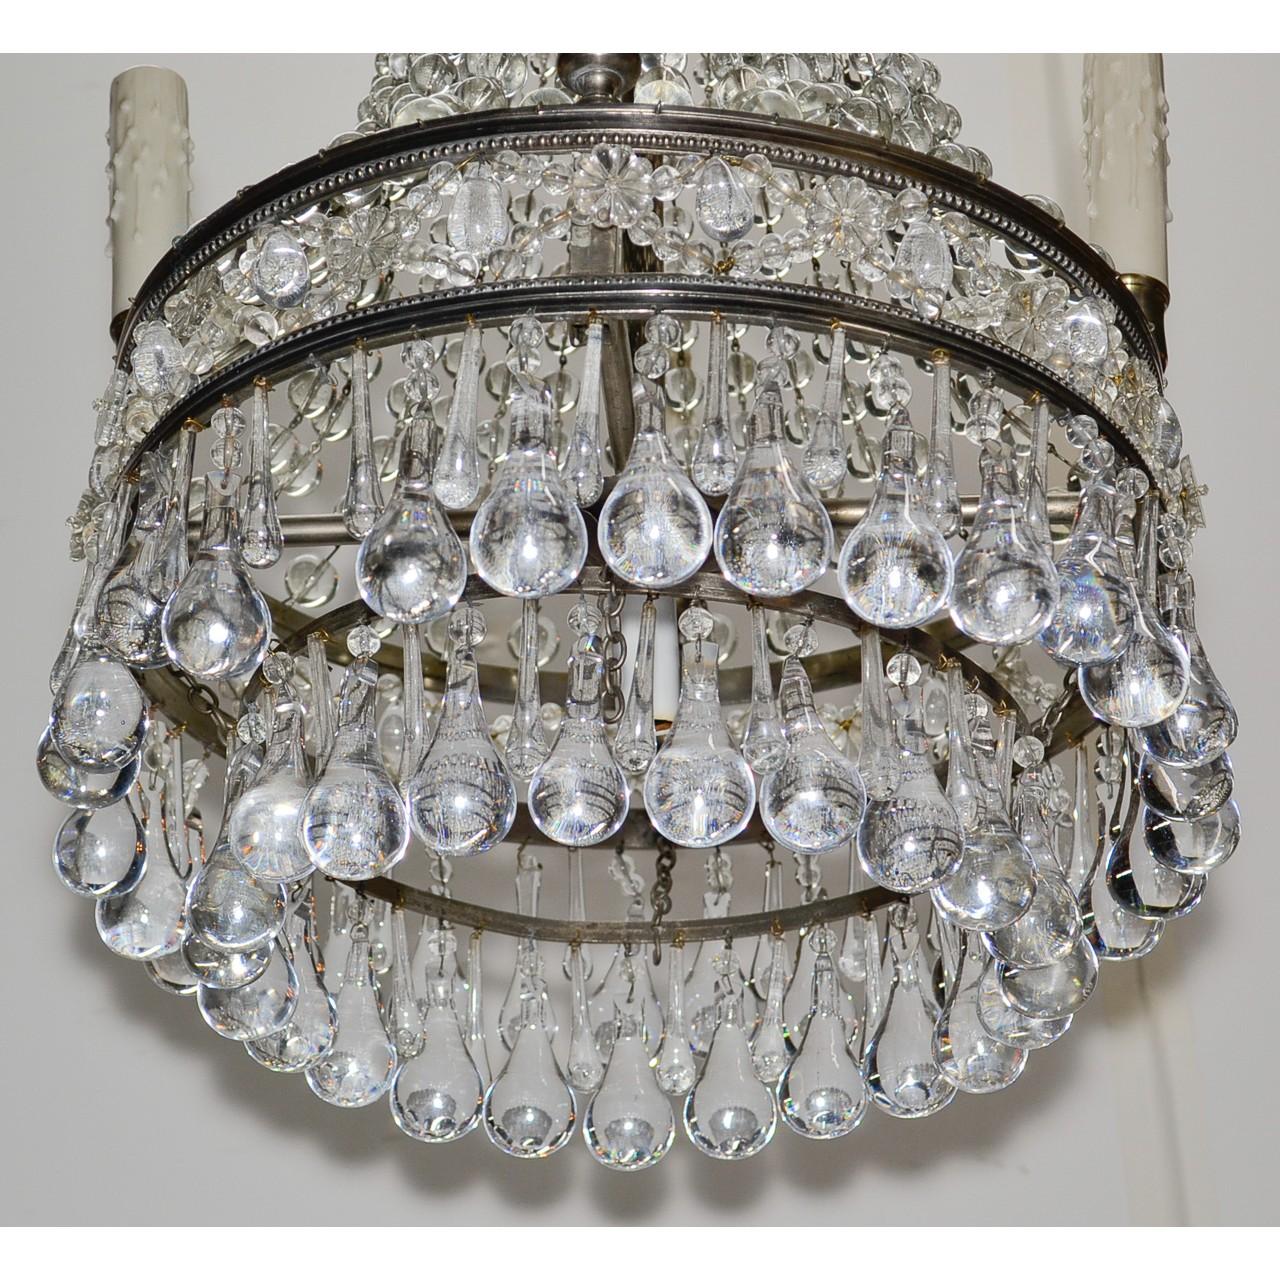 Lovely antique French 8-light beaded teardrop chandelier.
Made in France, circa 1920.
We will supply 3 feet of chain and a matching canopy.